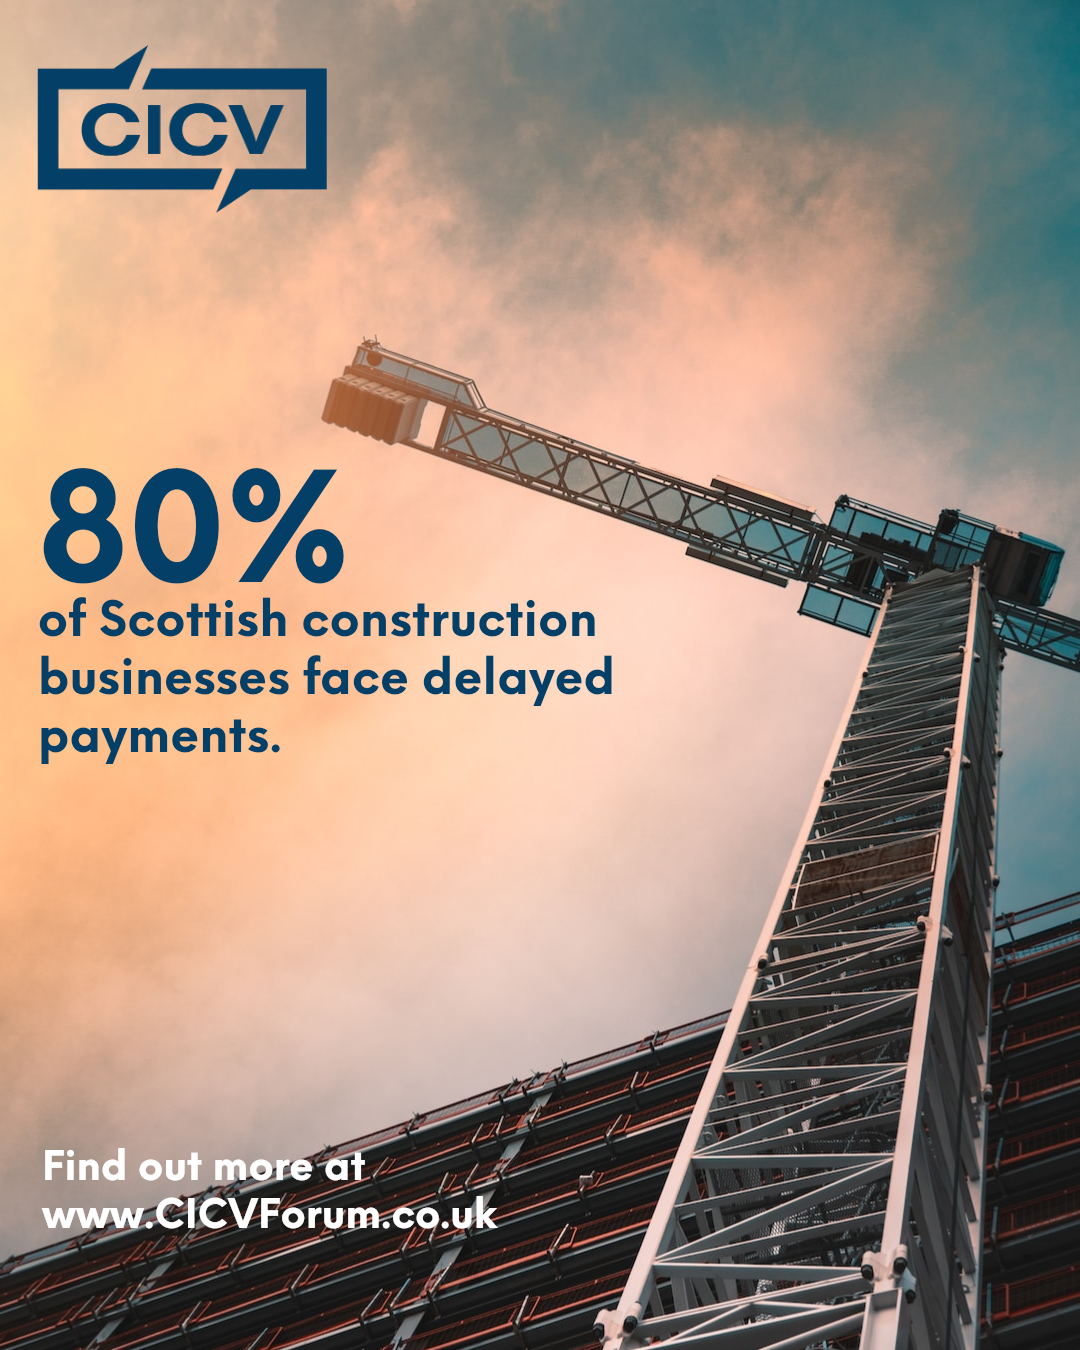 CICV survey reveals 'deep-rooted' payment challenges in Scottish construction sector